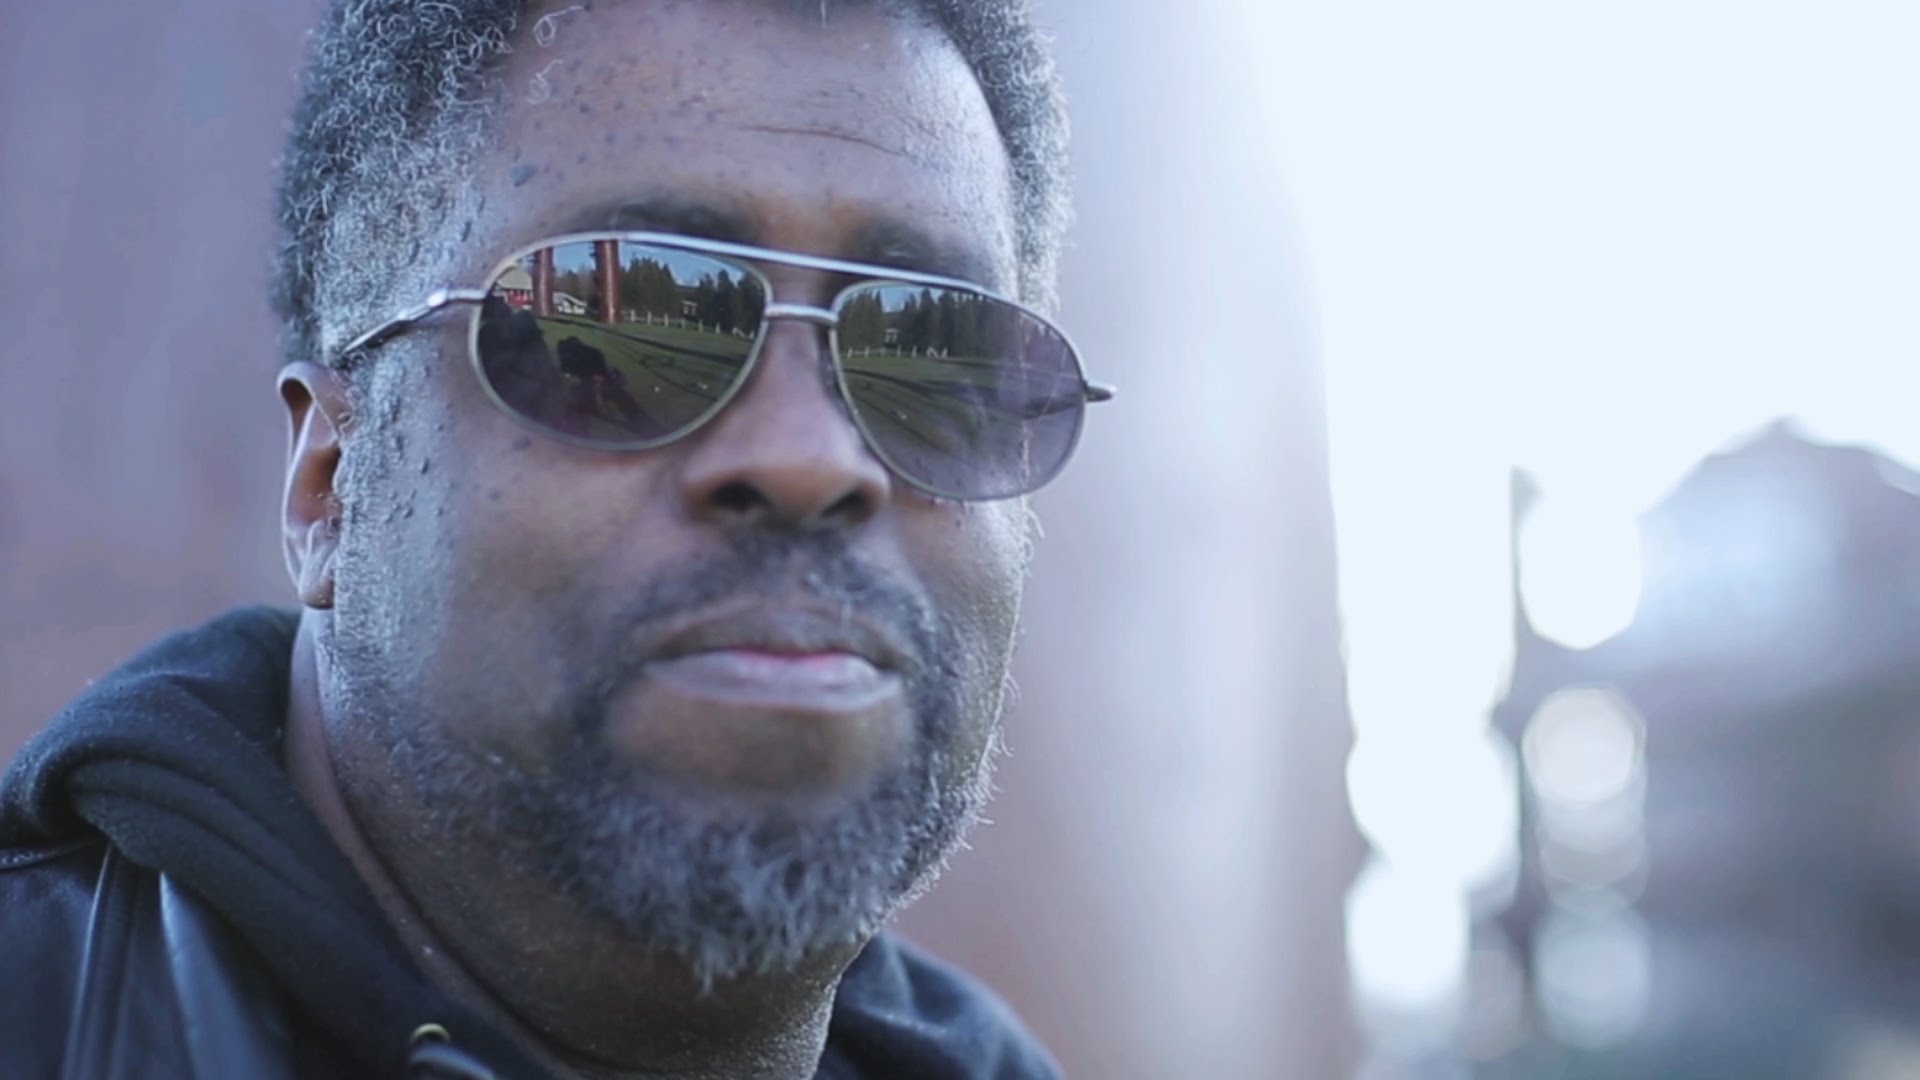 Image for "Cyberpunk was a warning, not an aspiration," says Cyberpunk creator Mike Pondsmith